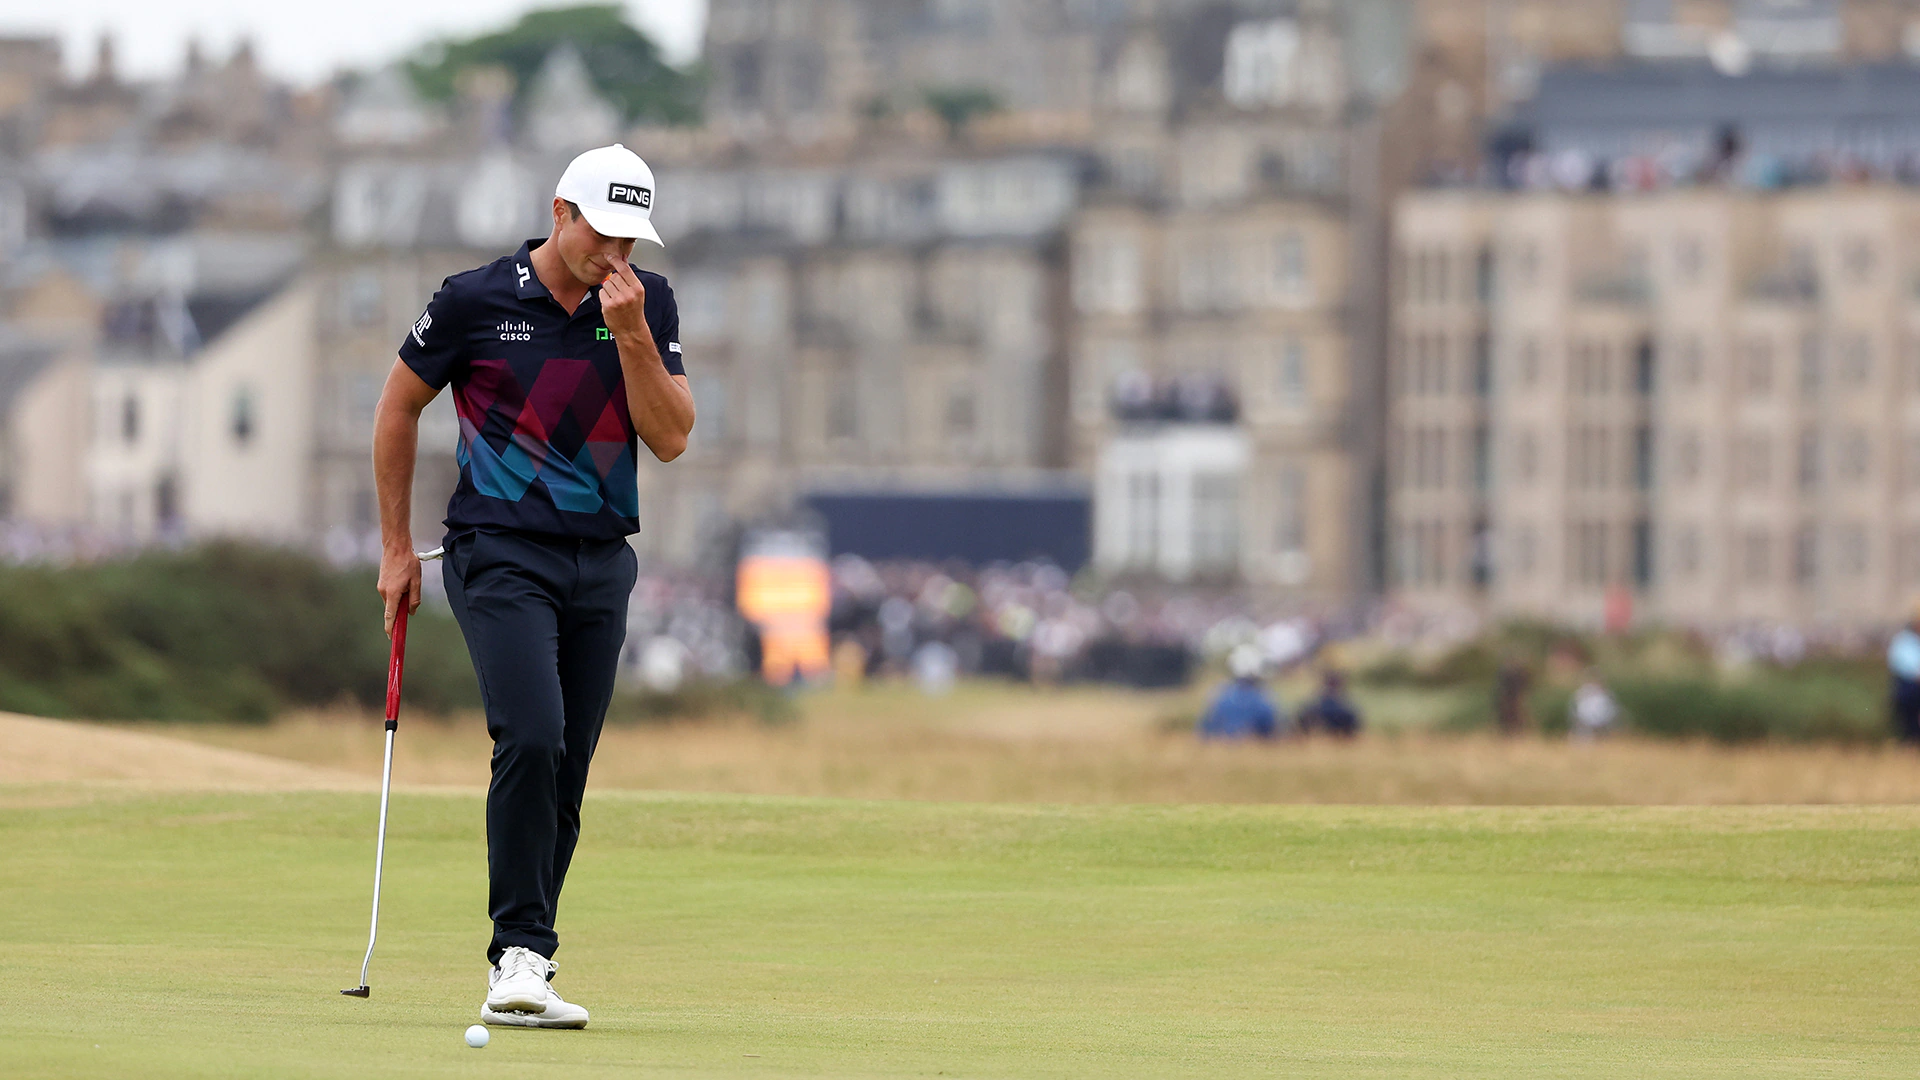 2022 British Open: ‘A little anti-climactic’: Viktor Hovland goes from co-lead to non-factor